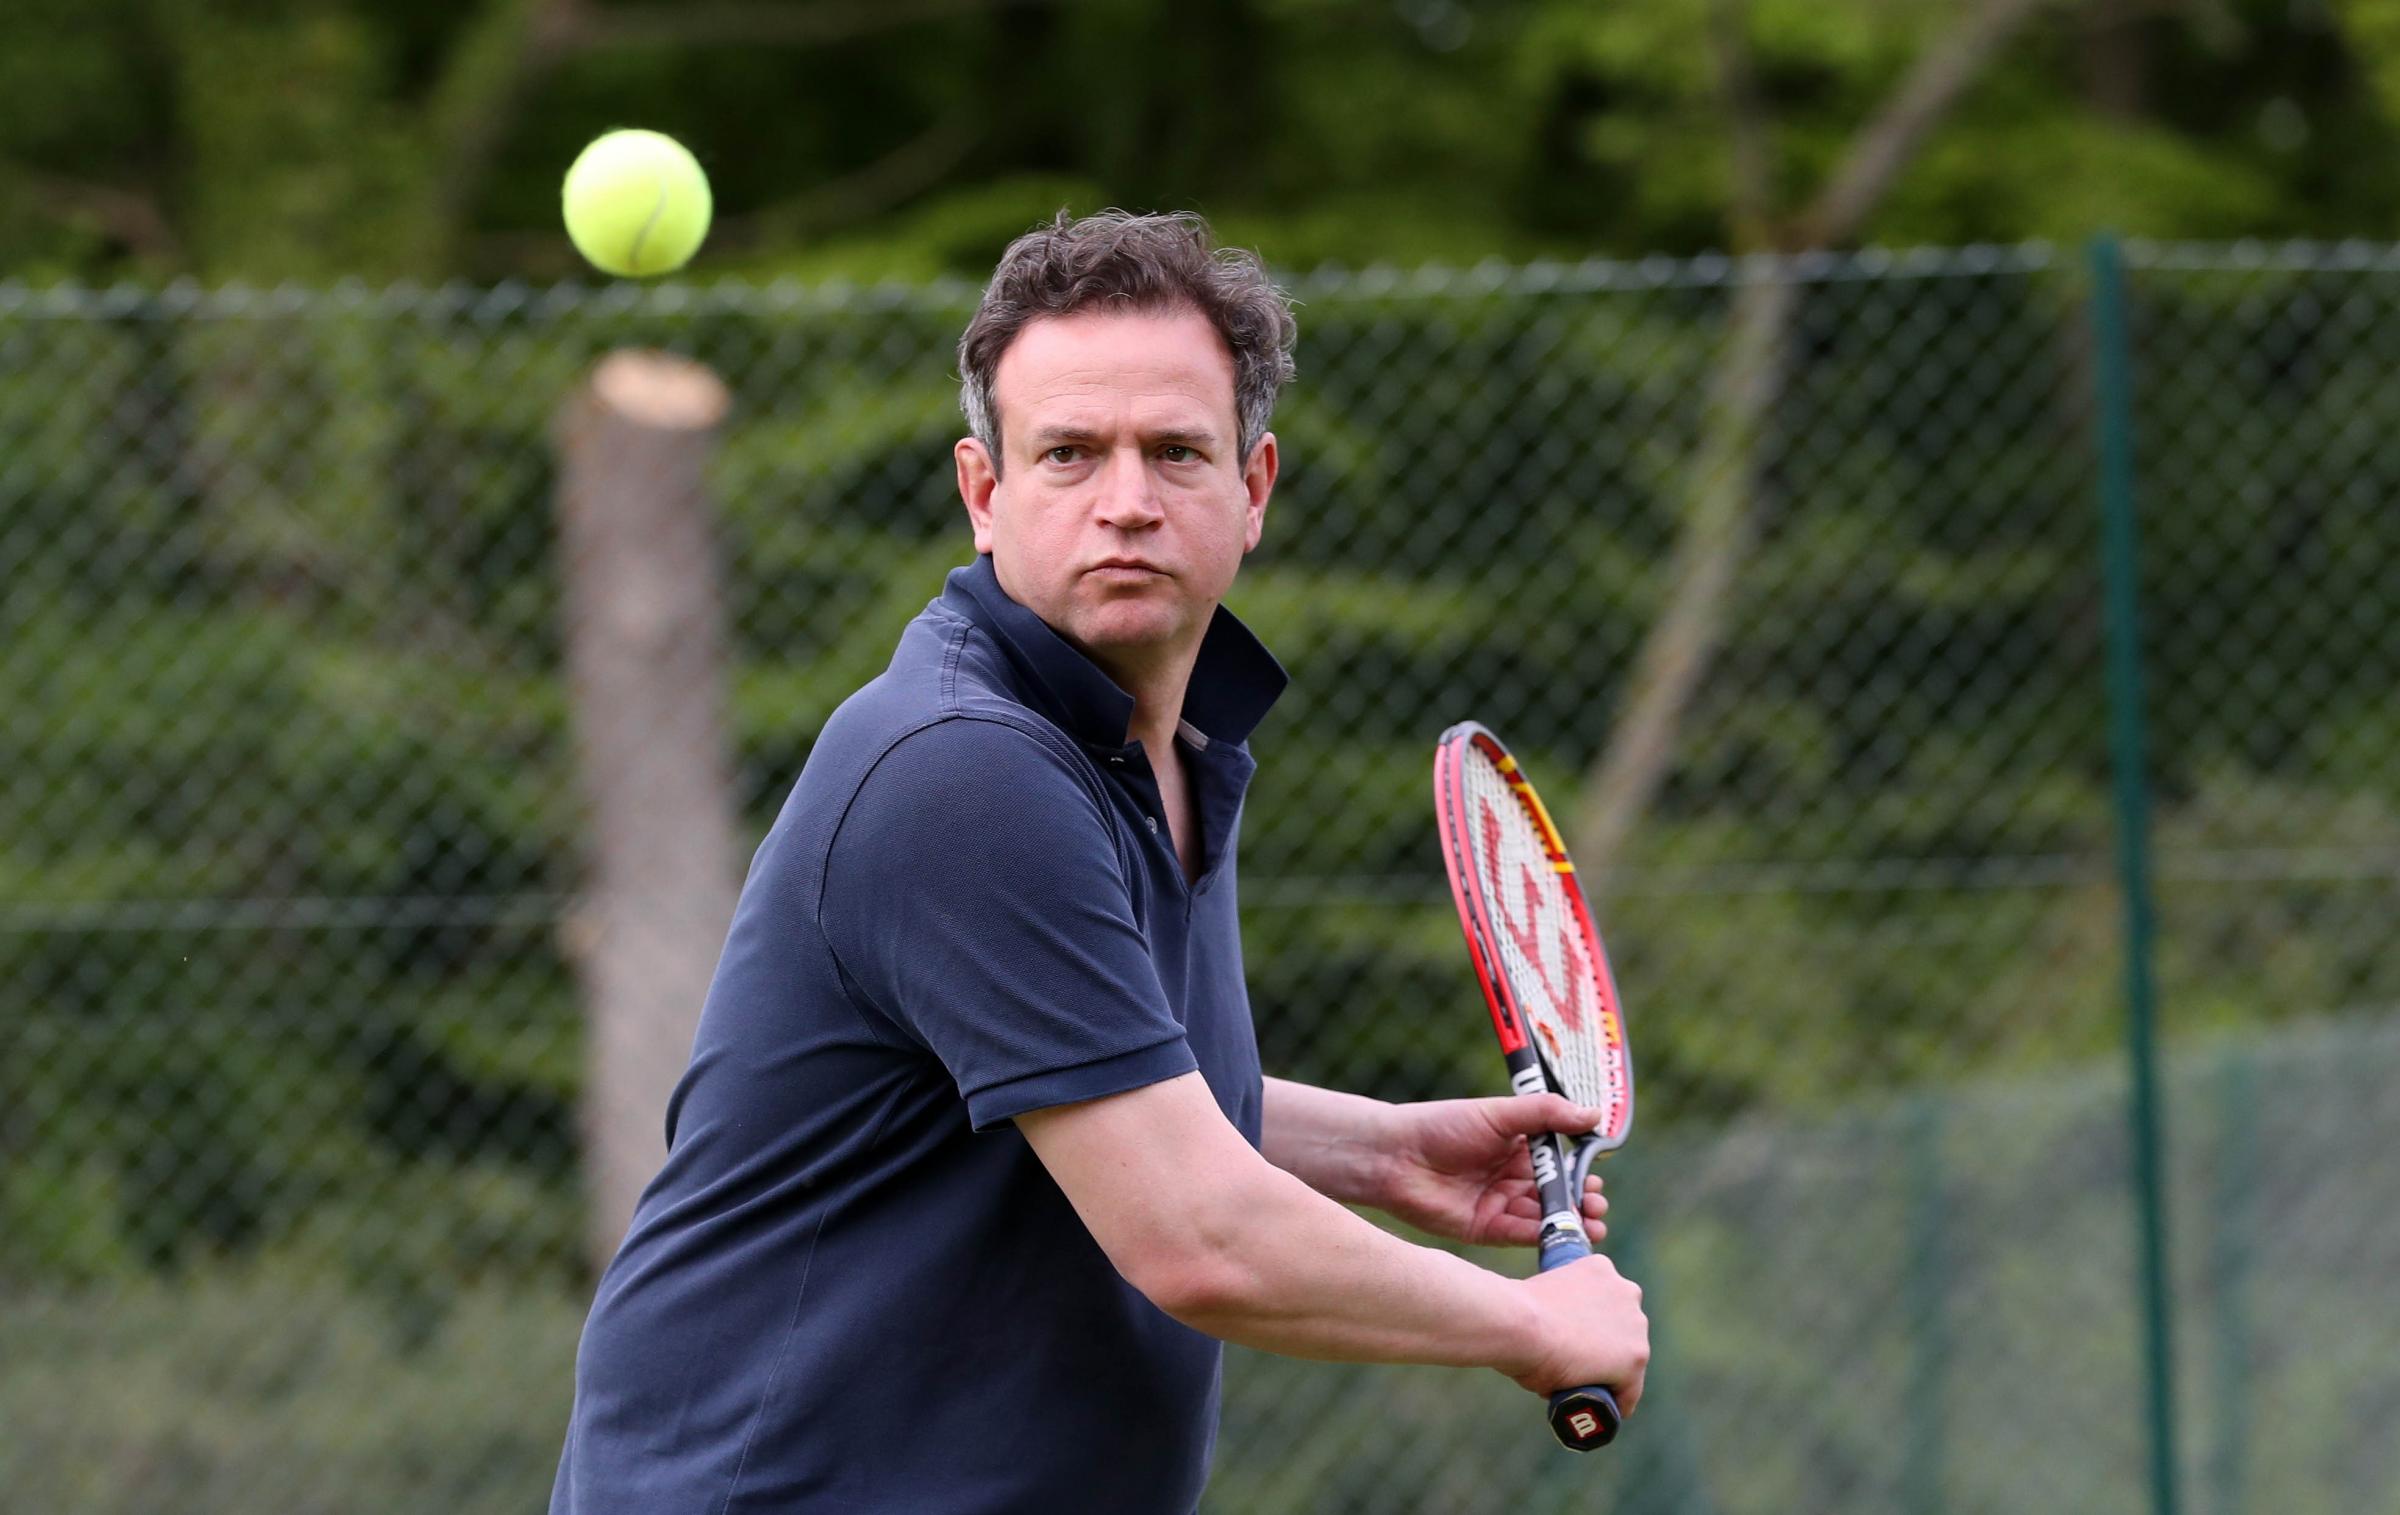 Ben Llewelyn will be playing tennis all day to raise money for the Ted Senior Foundation. Picture: Michael Hall Photography